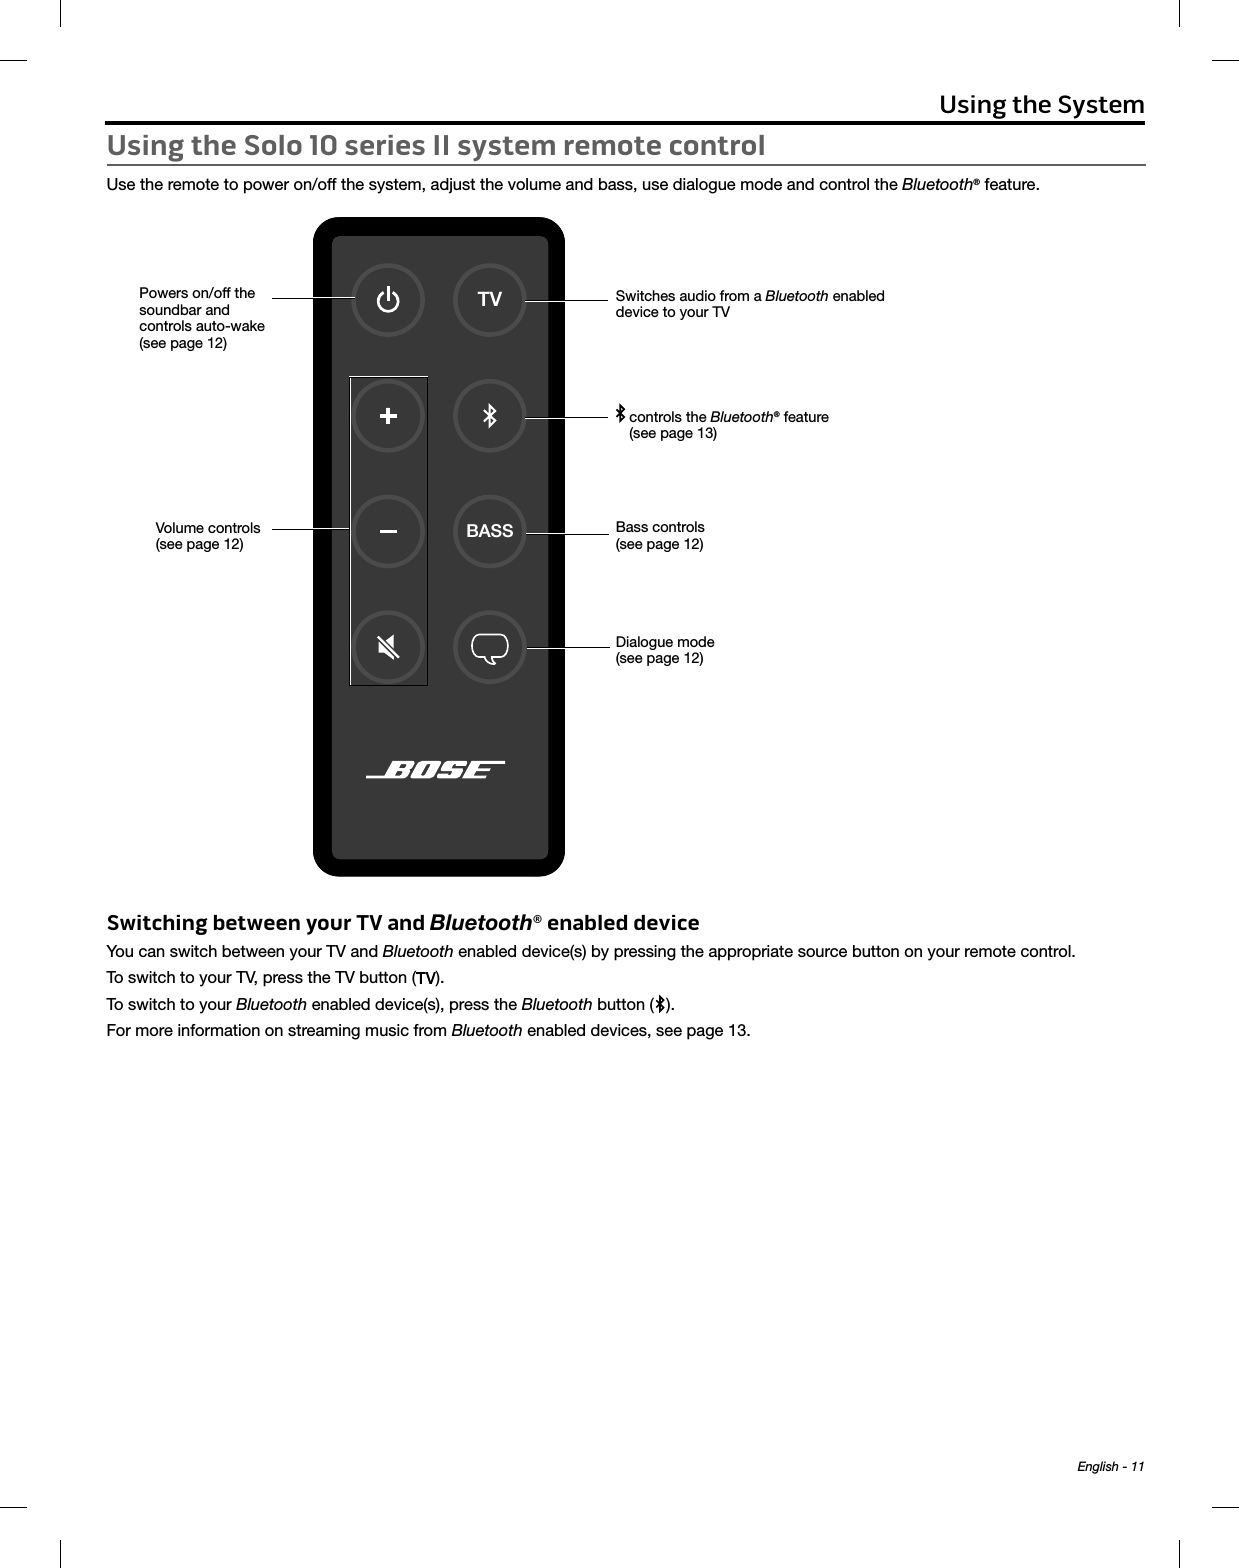 English - 11Using the SystemUsing the Solo 10 series II system remote controlUse the remote to power on/off the system, adjust the volume and bass, use dialogue mode and control the Bluetooth® feature.Powers on/off the  soundbar and  controls auto-wake  (see page 12)TVBASSVolume controls (see page 12)Switches audio from a Bluetooth enabled device to your TV  controls the Bluetooth® feature (see page 13)Bass controls (see page 12)Dialogue mode (see page 12)Switching between your TV and Bluetooth® enabled deviceYou can switch between your TV and Bluetooth enabled device(s) by pressing the appropriate source button on your remote control. To switch to your TV, press the TV button ( ).To switch to your Bluetooth enabled device(s), press the Bluetooth button ( ). For more information on streaming music from Bluetooth enabled devices, see page 13.